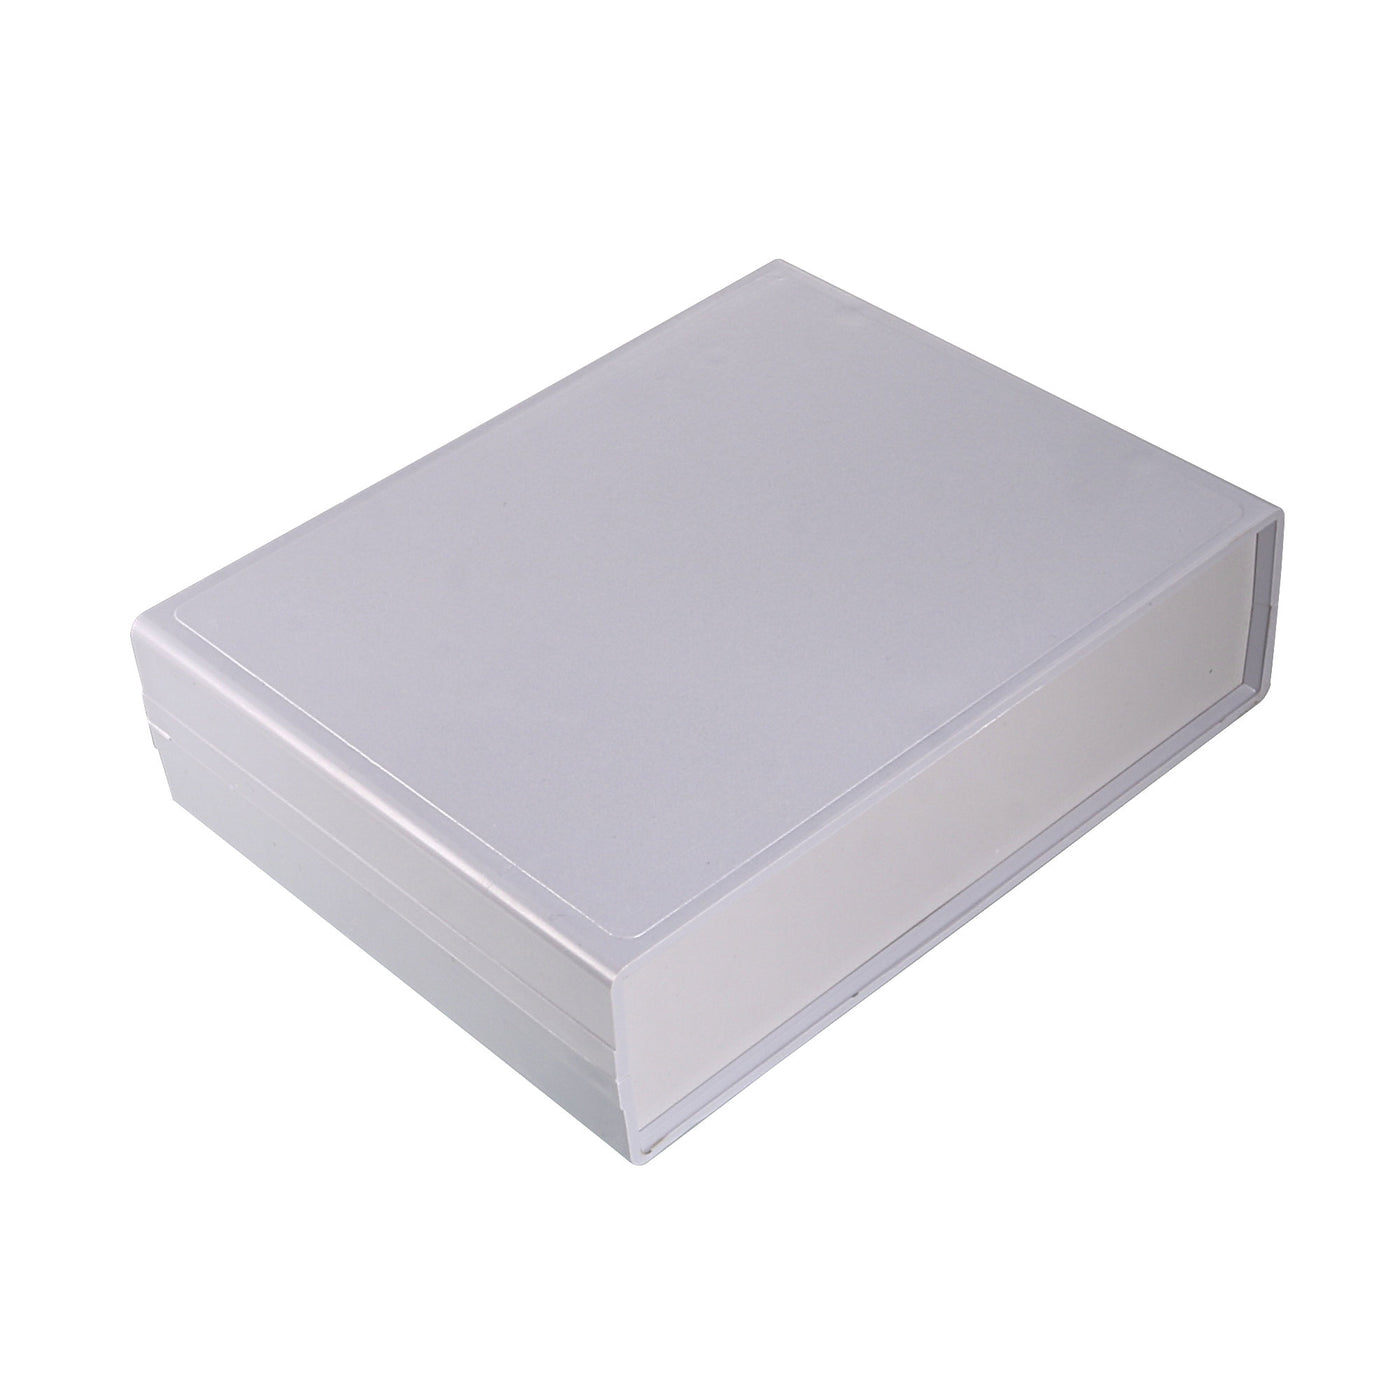 uxcell Uxcell 155 x 120 x 41mm Electronic Plastic DIY Junction Box Enclosure Case Gray